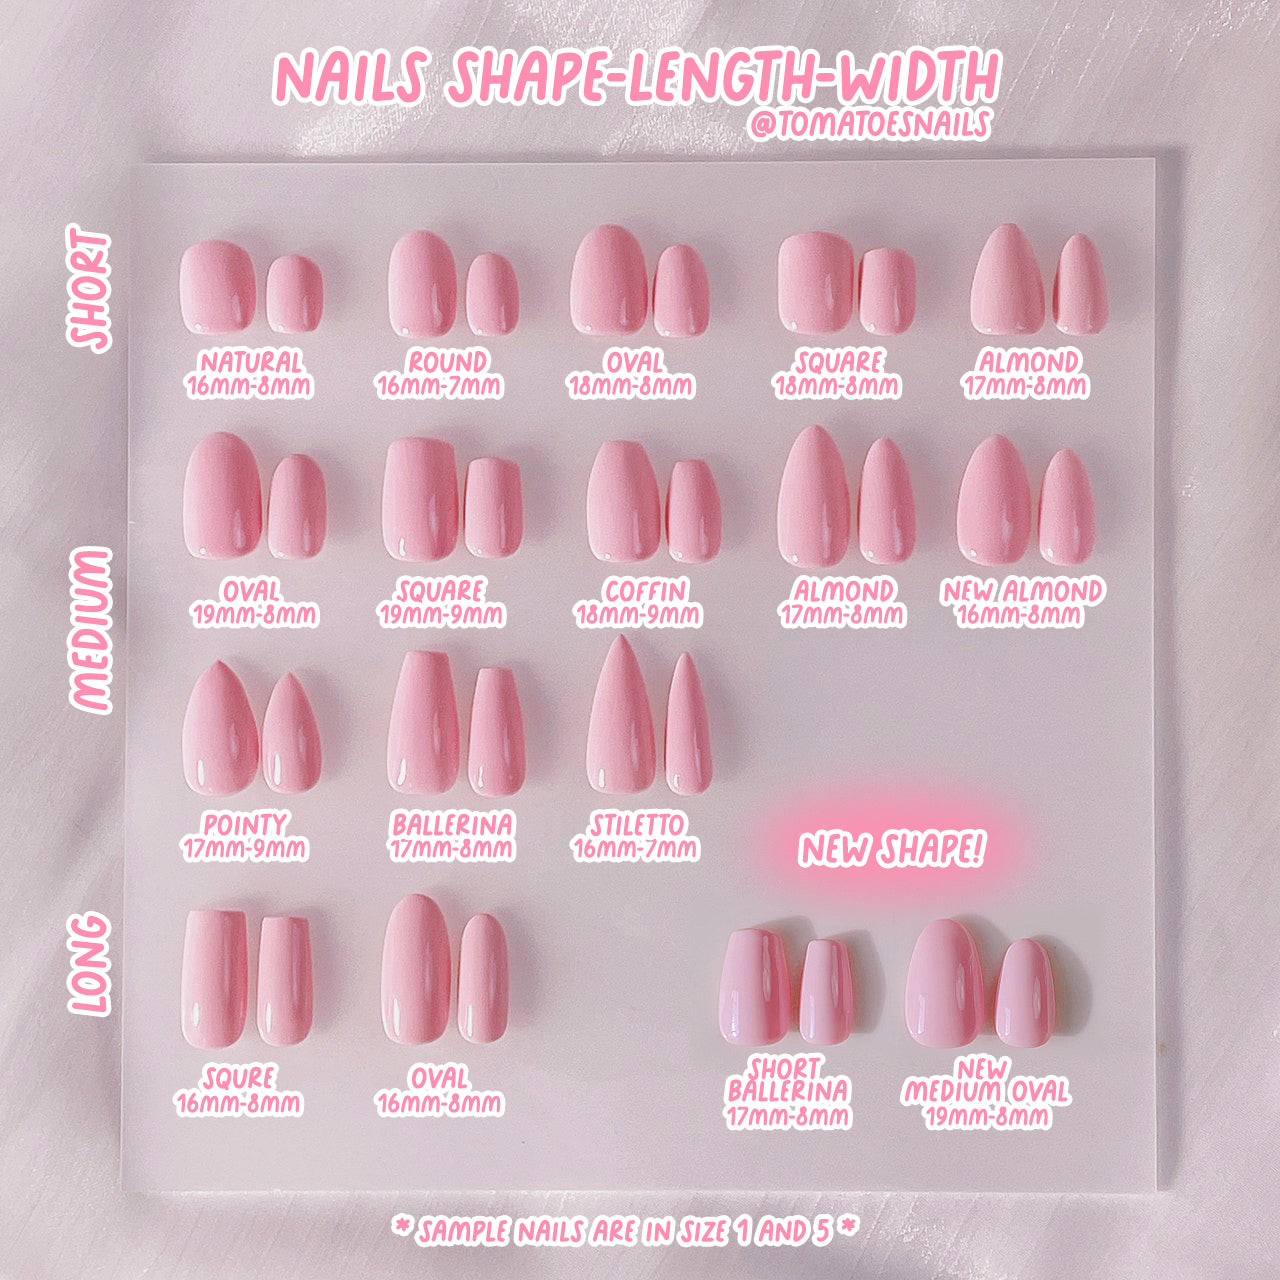 How To Get Your Pastel Nails Done In 5 Easy Steps • Exquisite Magazine -  Fashion, Beauty And Lifestyle